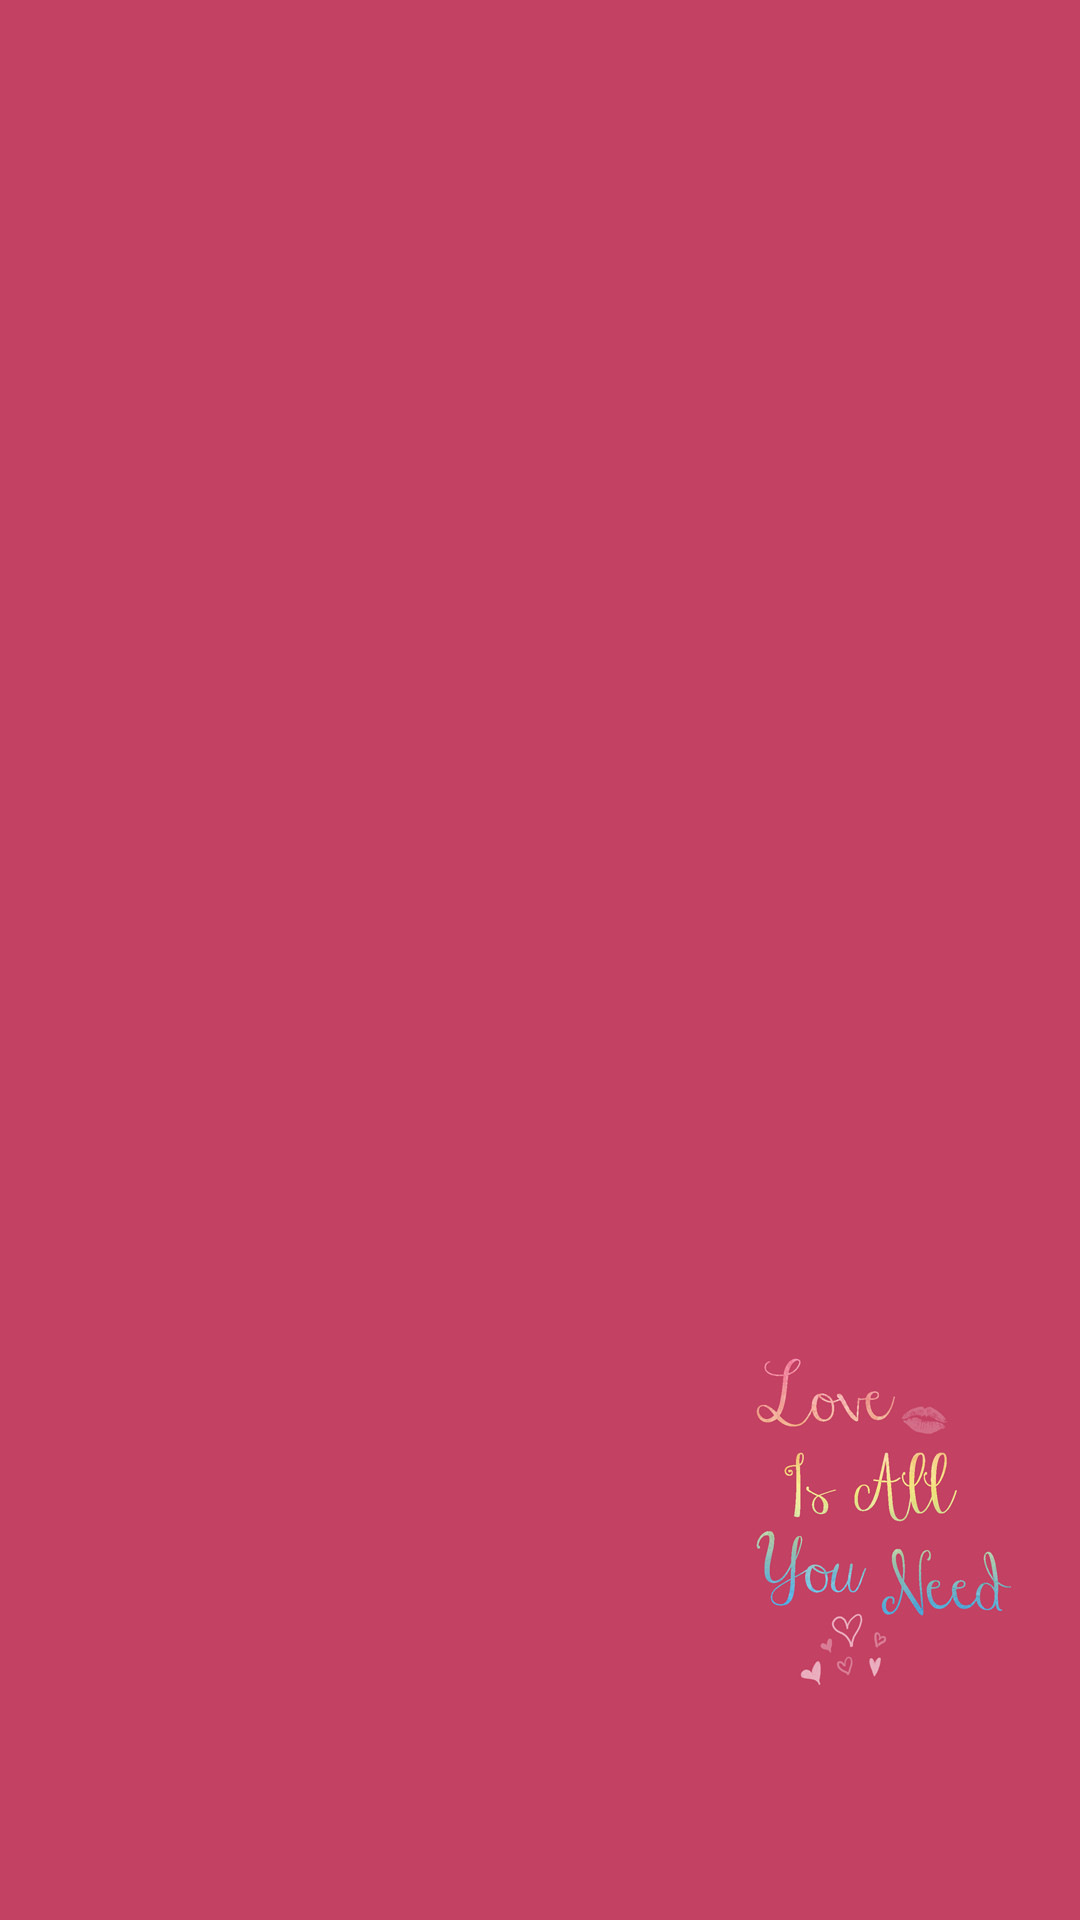 Quote Love Lips Rouge iPhone Wallpaper Pink Home Screen